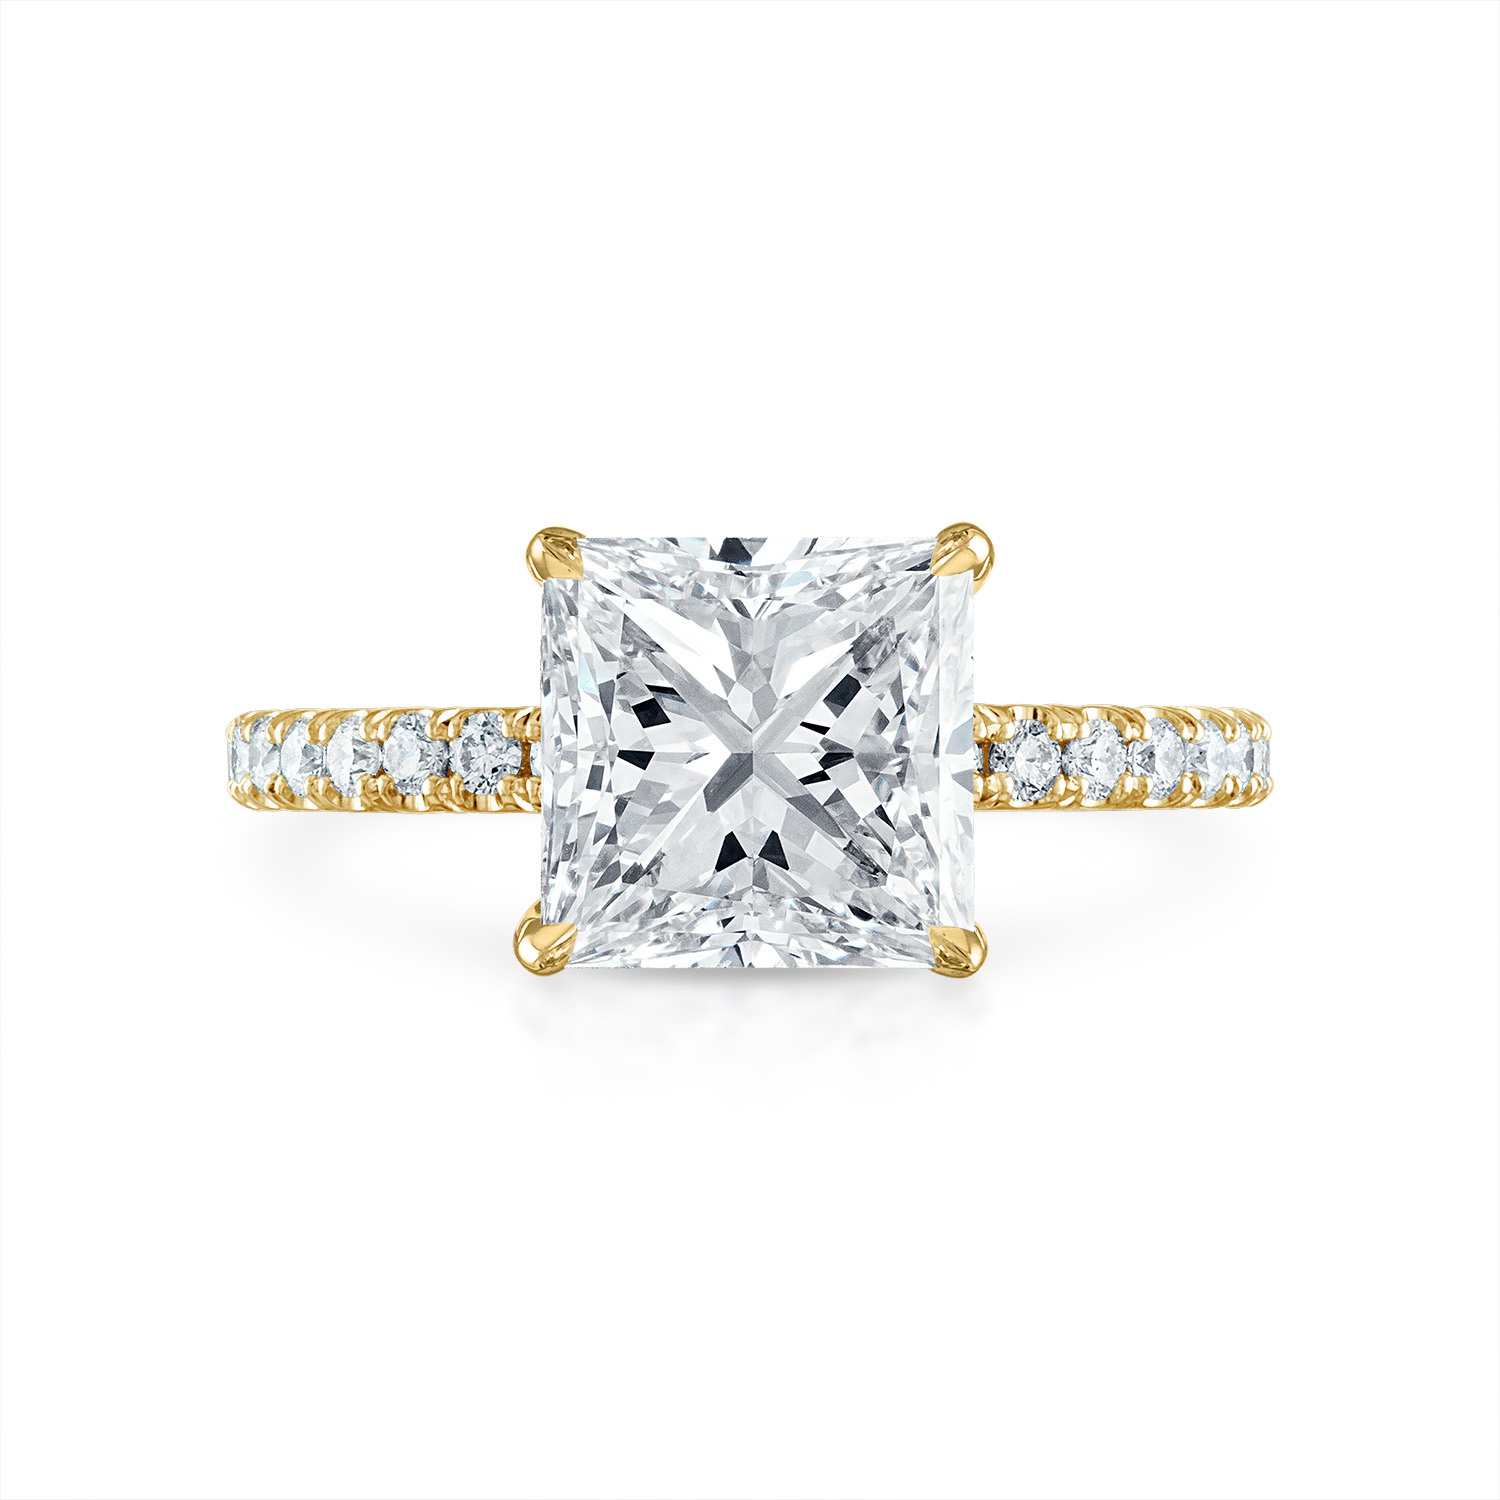 Princess Pave Engagement Ring in Yellow Gold